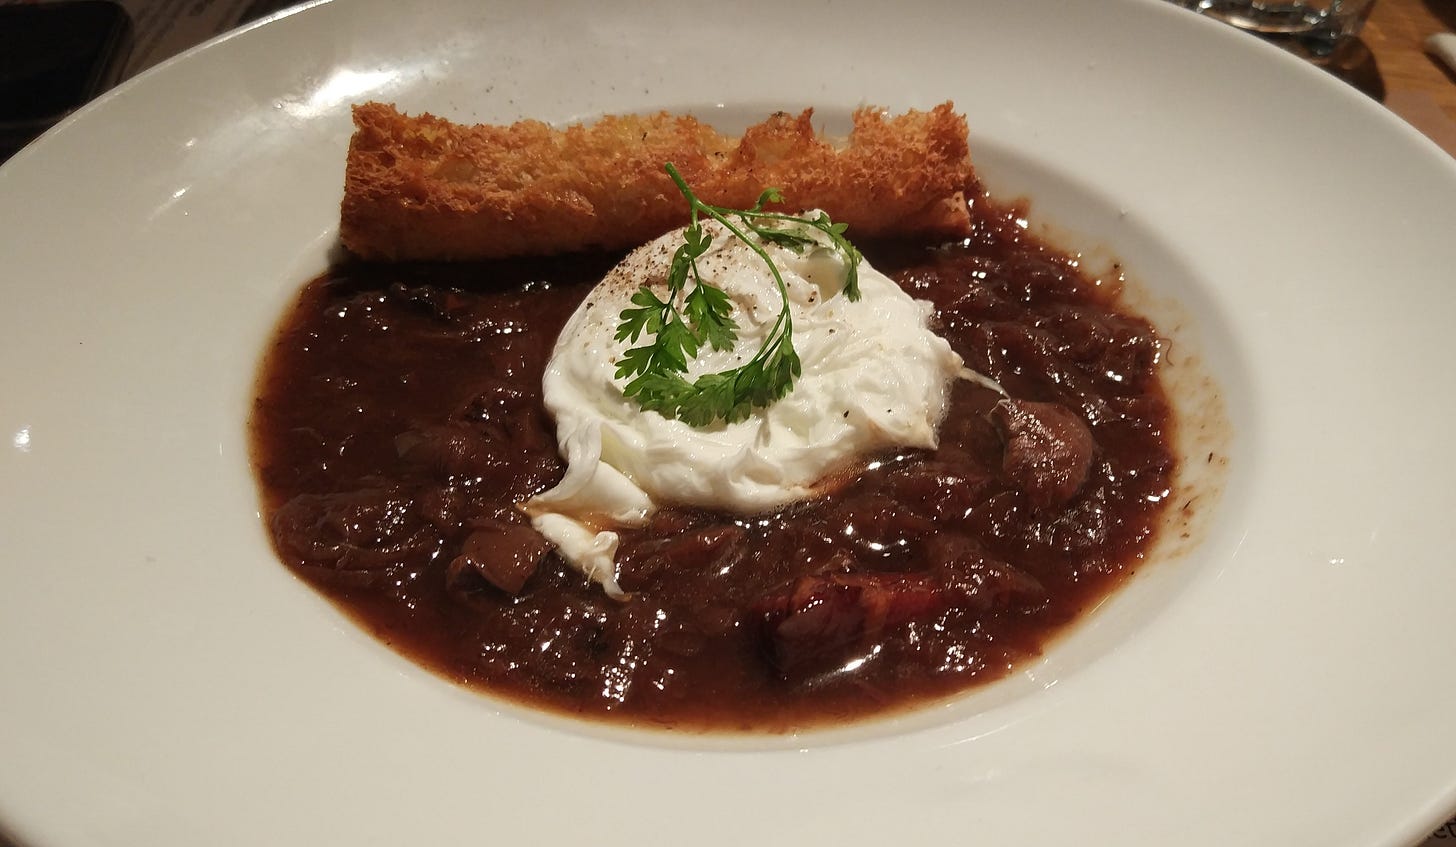 Oeuf en meurette, a french starter dish consisting of a poached egg in a bed of rich, reddish beef bourgignon sauce and a piece of crispy bread. Garnished with a sprig of parsley.